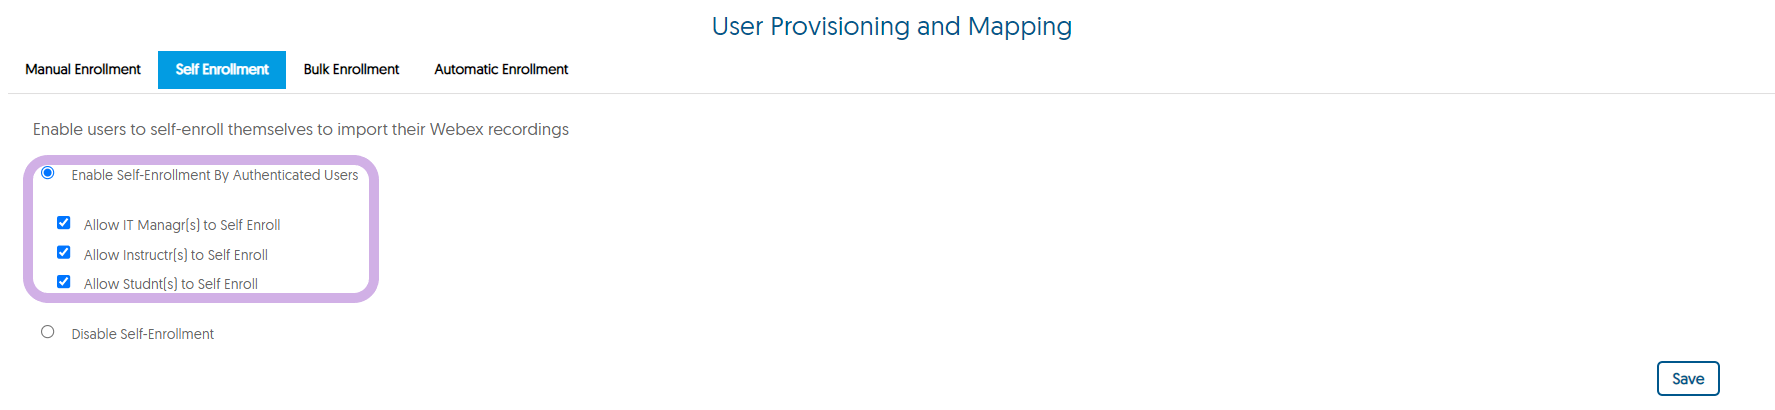 The User Provisioning and Mapping panel for Webex with Enable Self-Enrollment by Authenticated Users checked.